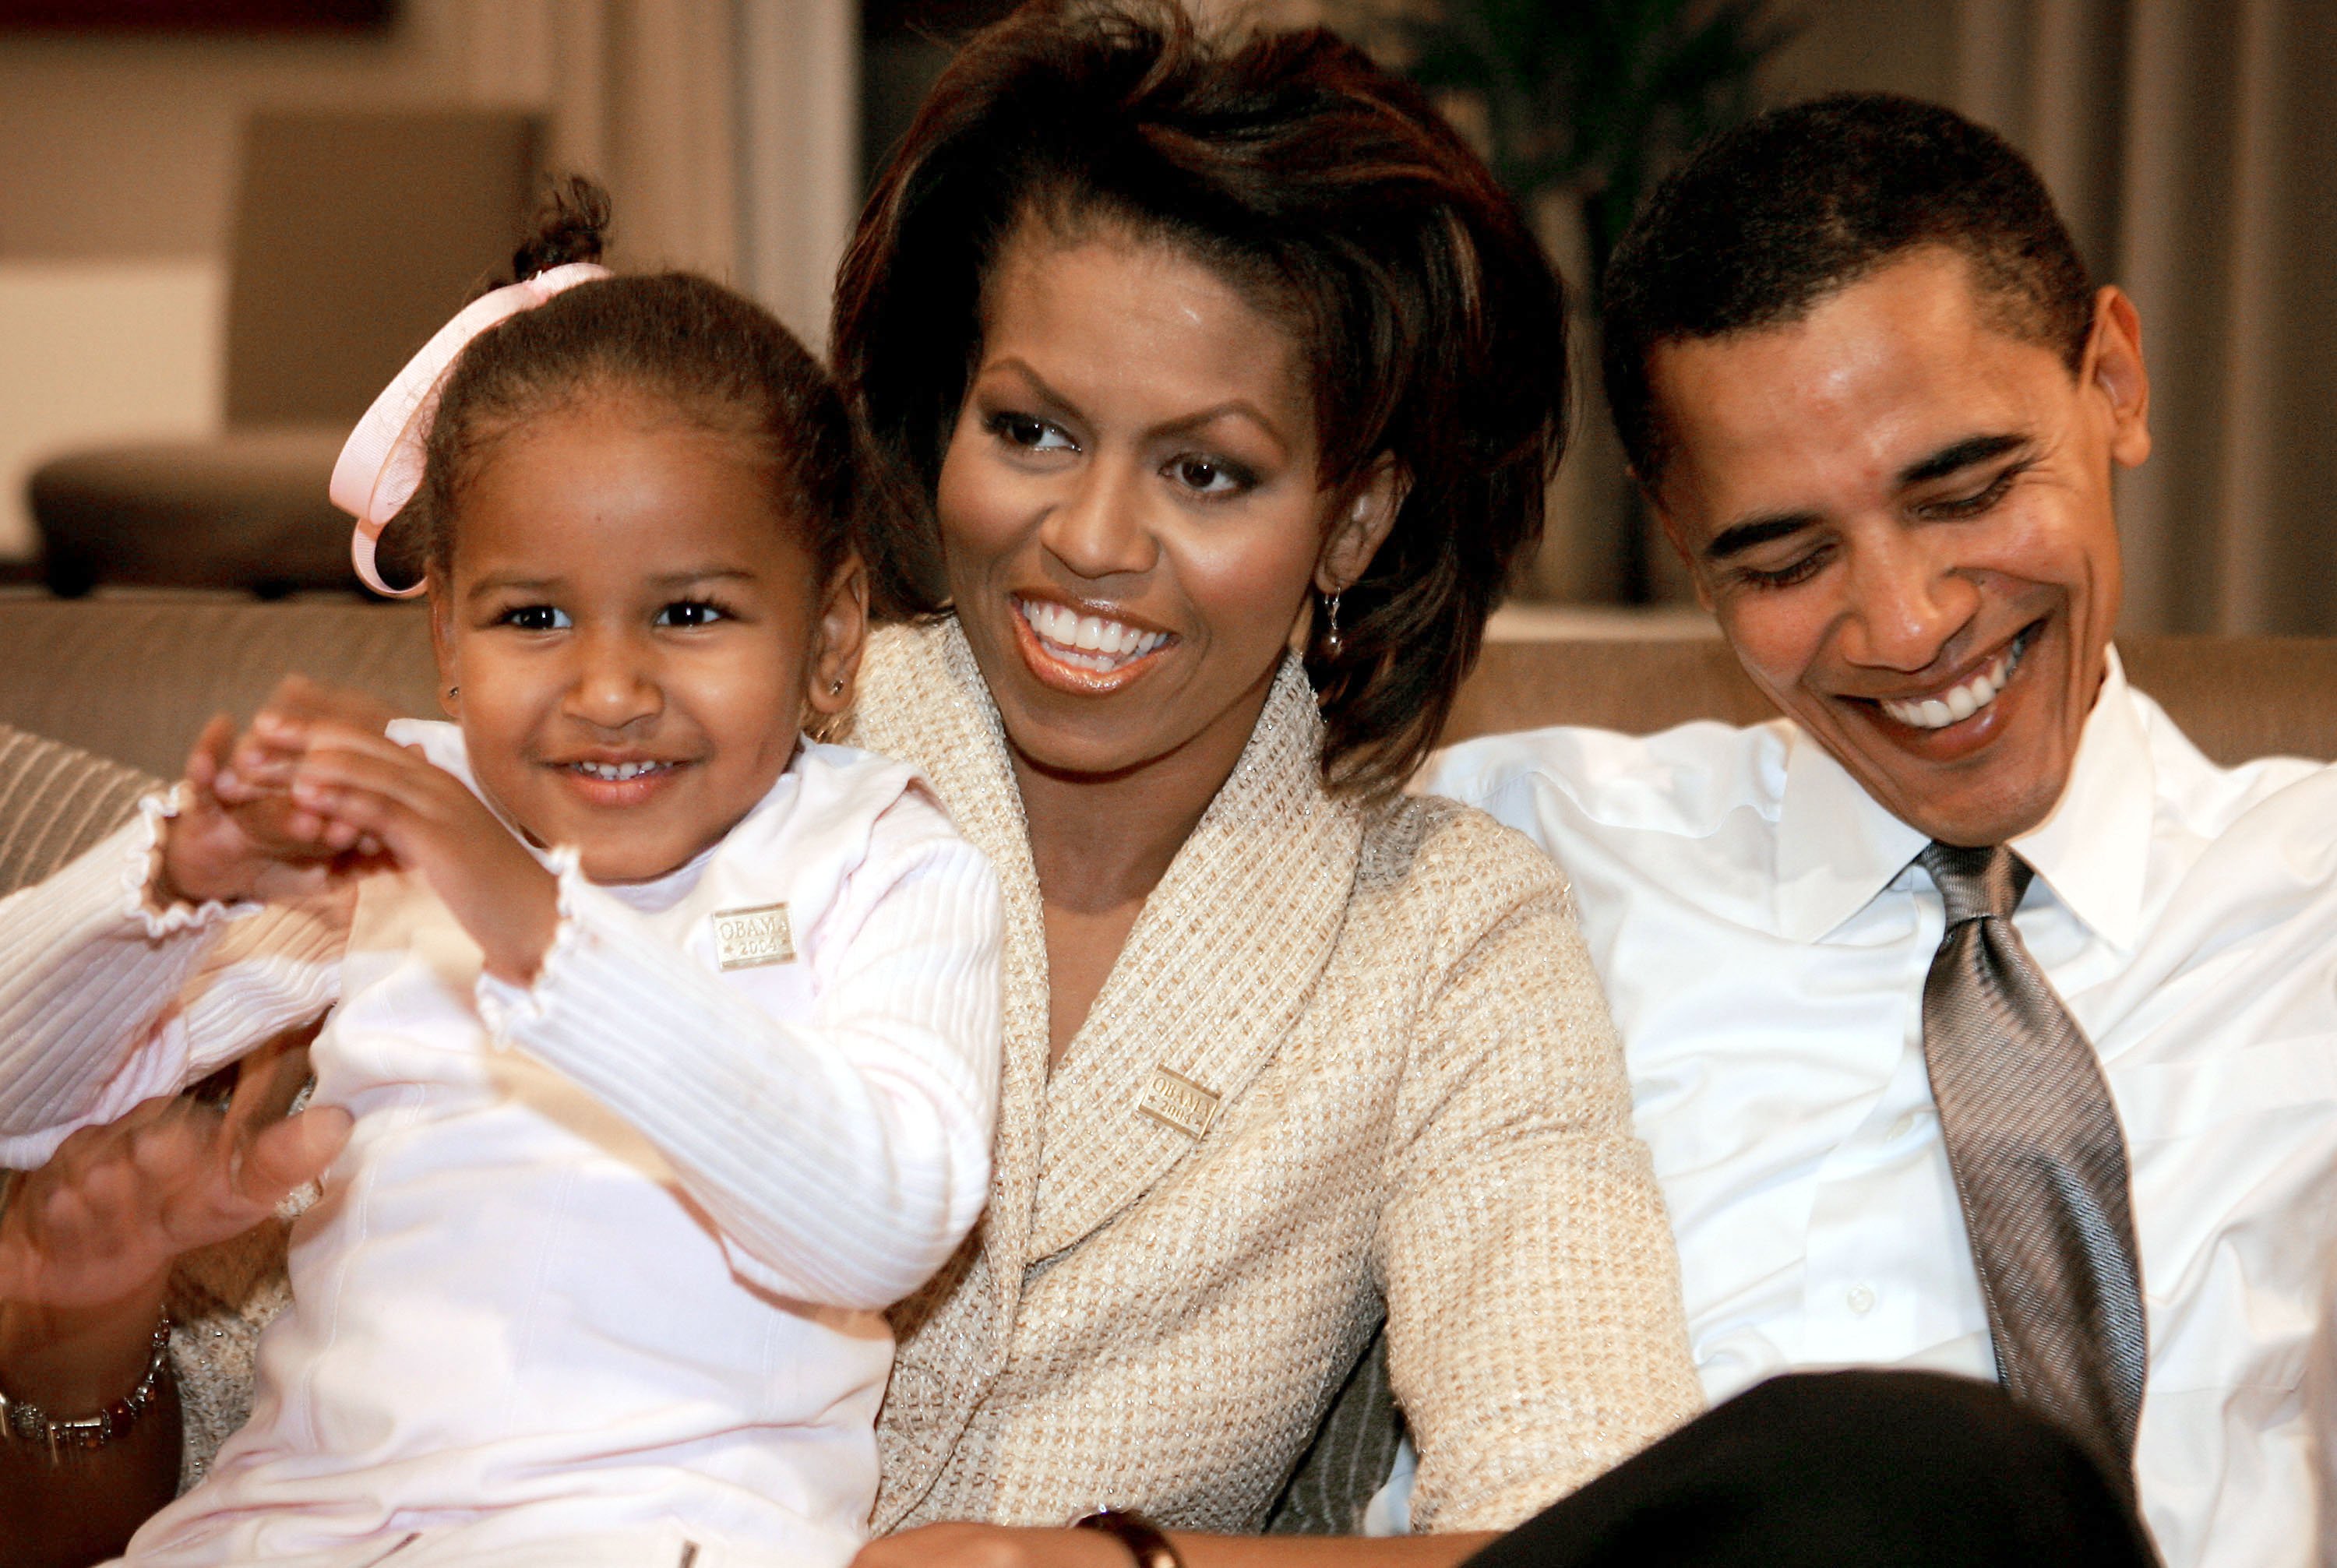  Barack Obama sits with his wife Michelle and daughters Sasha in a hotel room as they wait for election returns to come in November 2, 2004 in Chicago, Illinois. | Photo: GettyImages